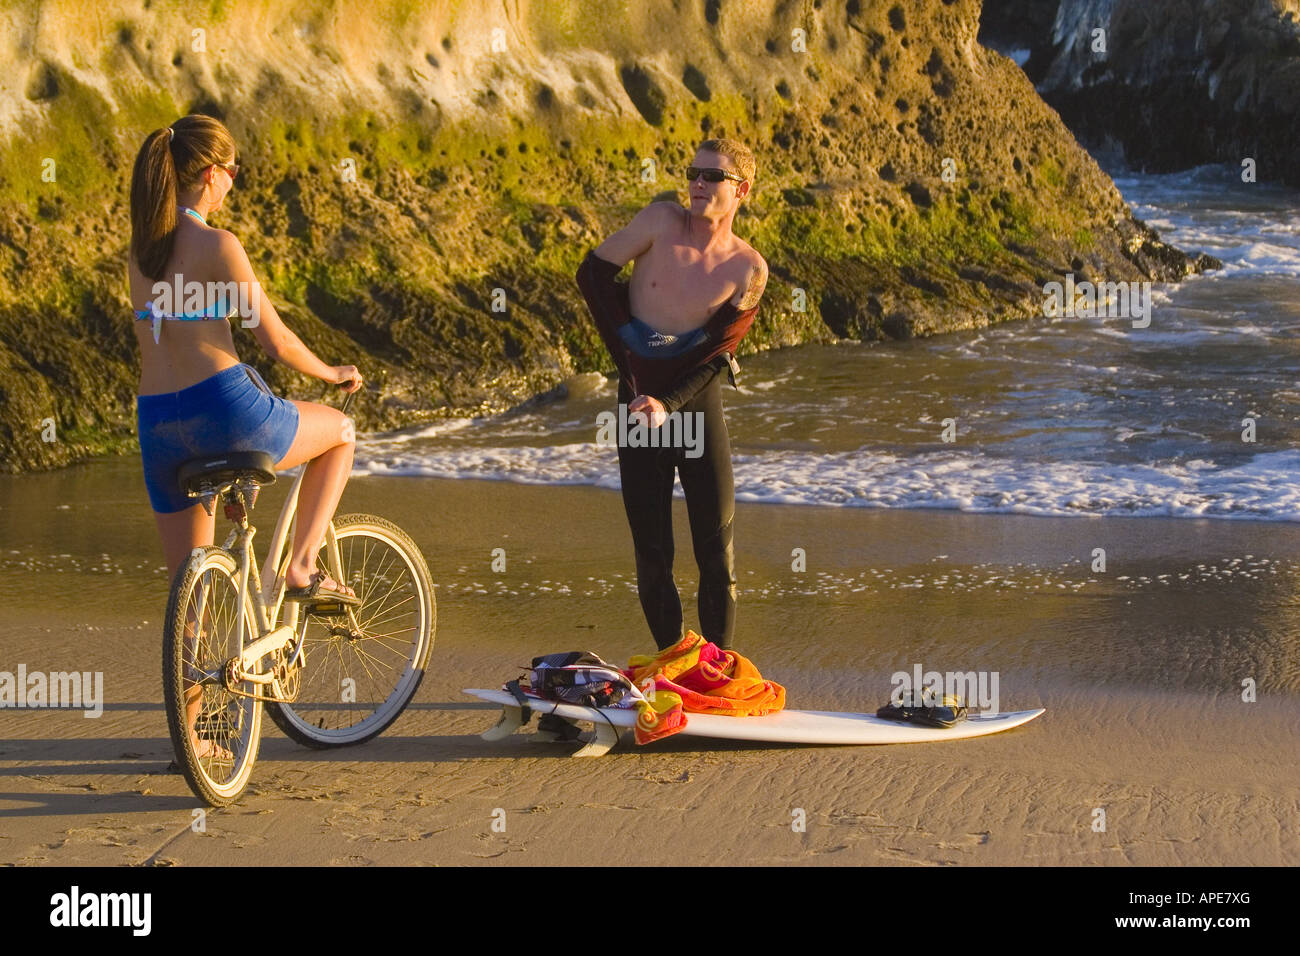 A woman on a cruiser bike and a man with a surfboard on the beach at Natural Bridges State Park in Santa Cruz in California Stock Photo